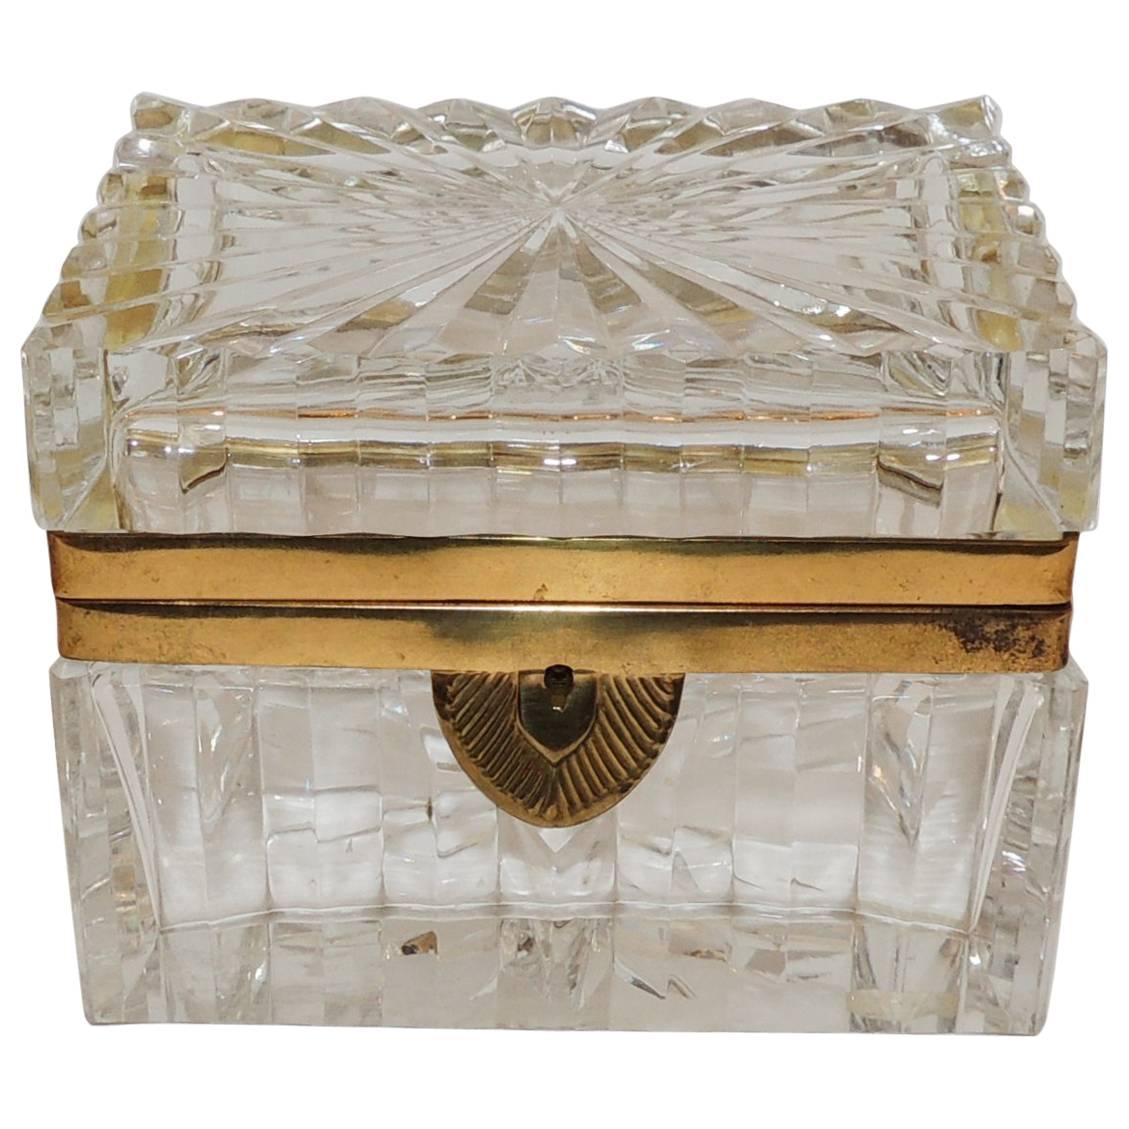 Stunning Pair French Etched Cut Crystal Ormolu-Mounted Deco Casket Jewelry Box